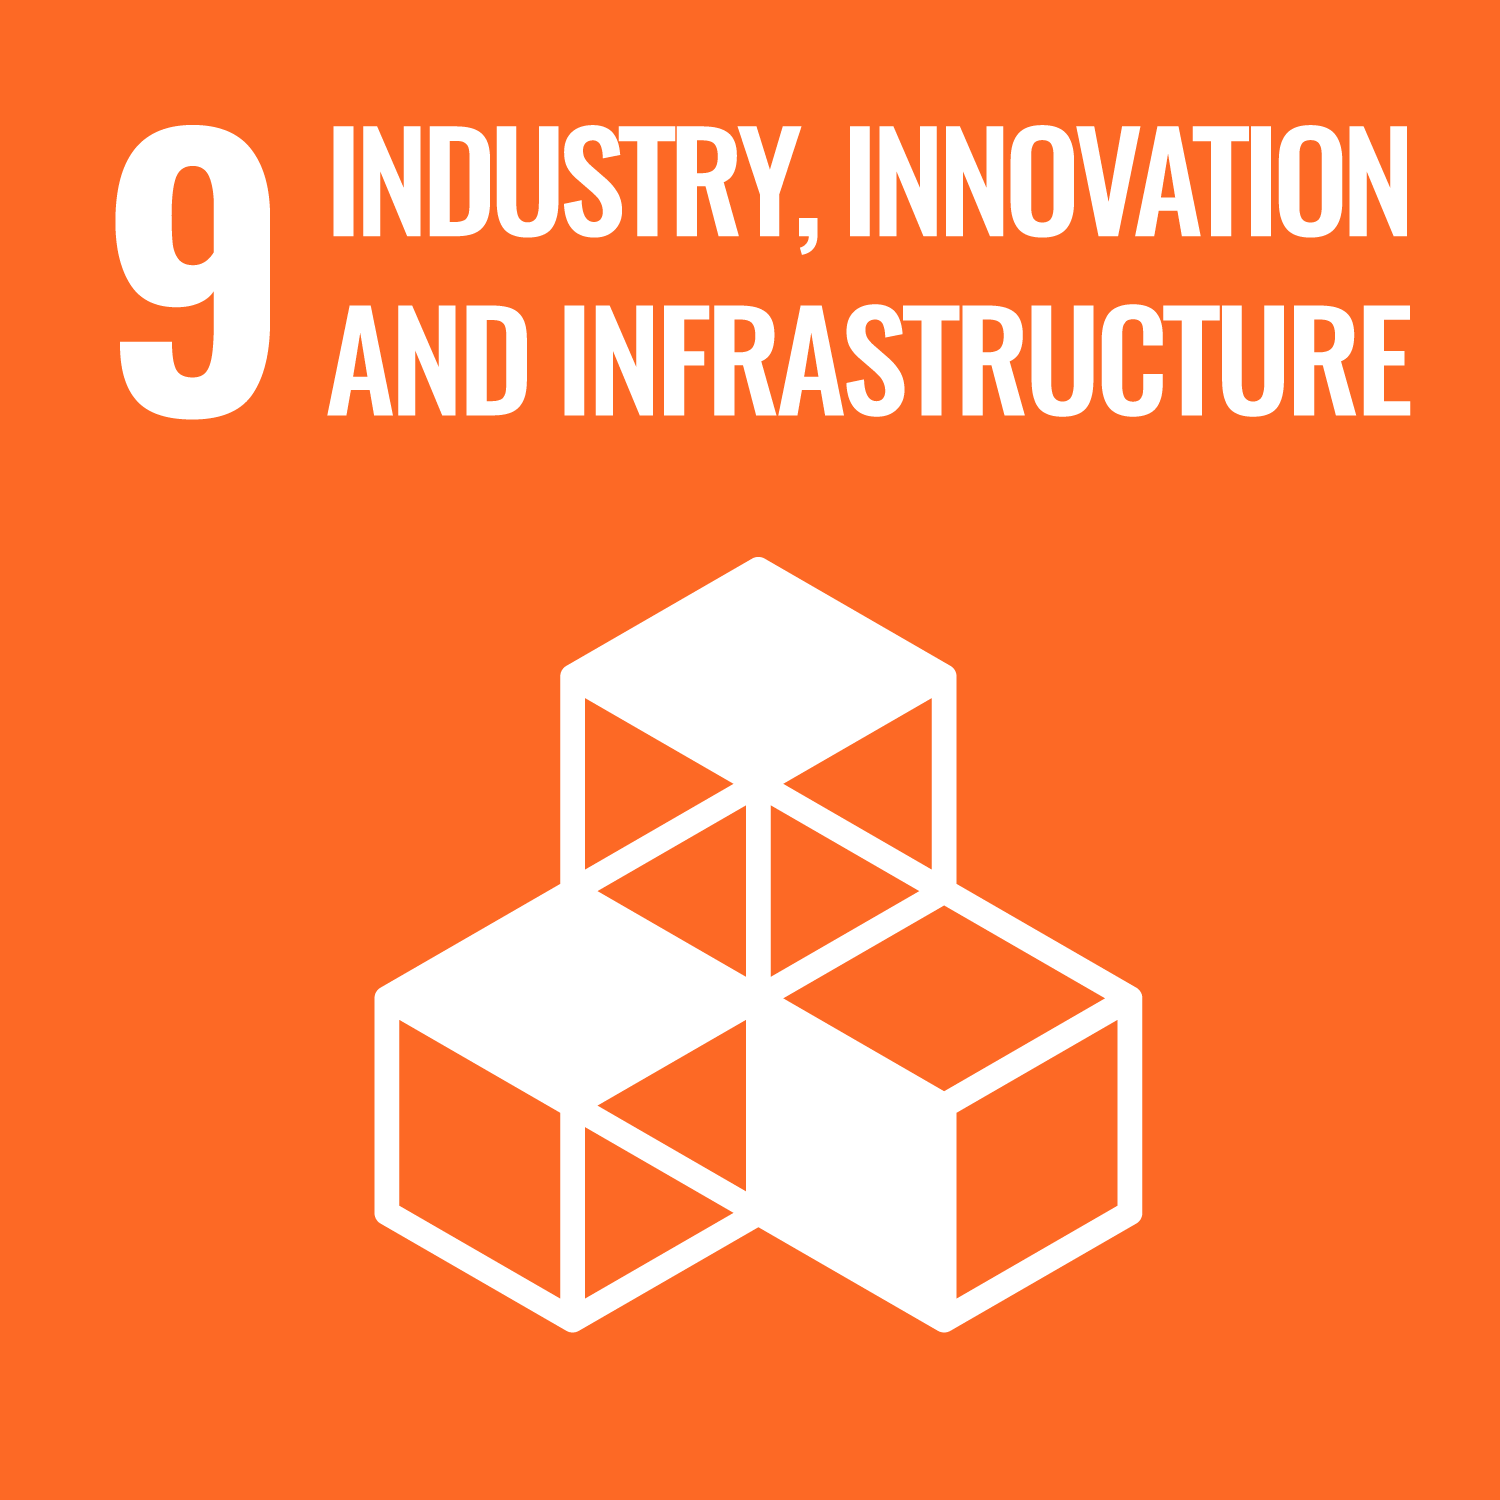 SDG 9. Industry, Innovation, and Infrastructure